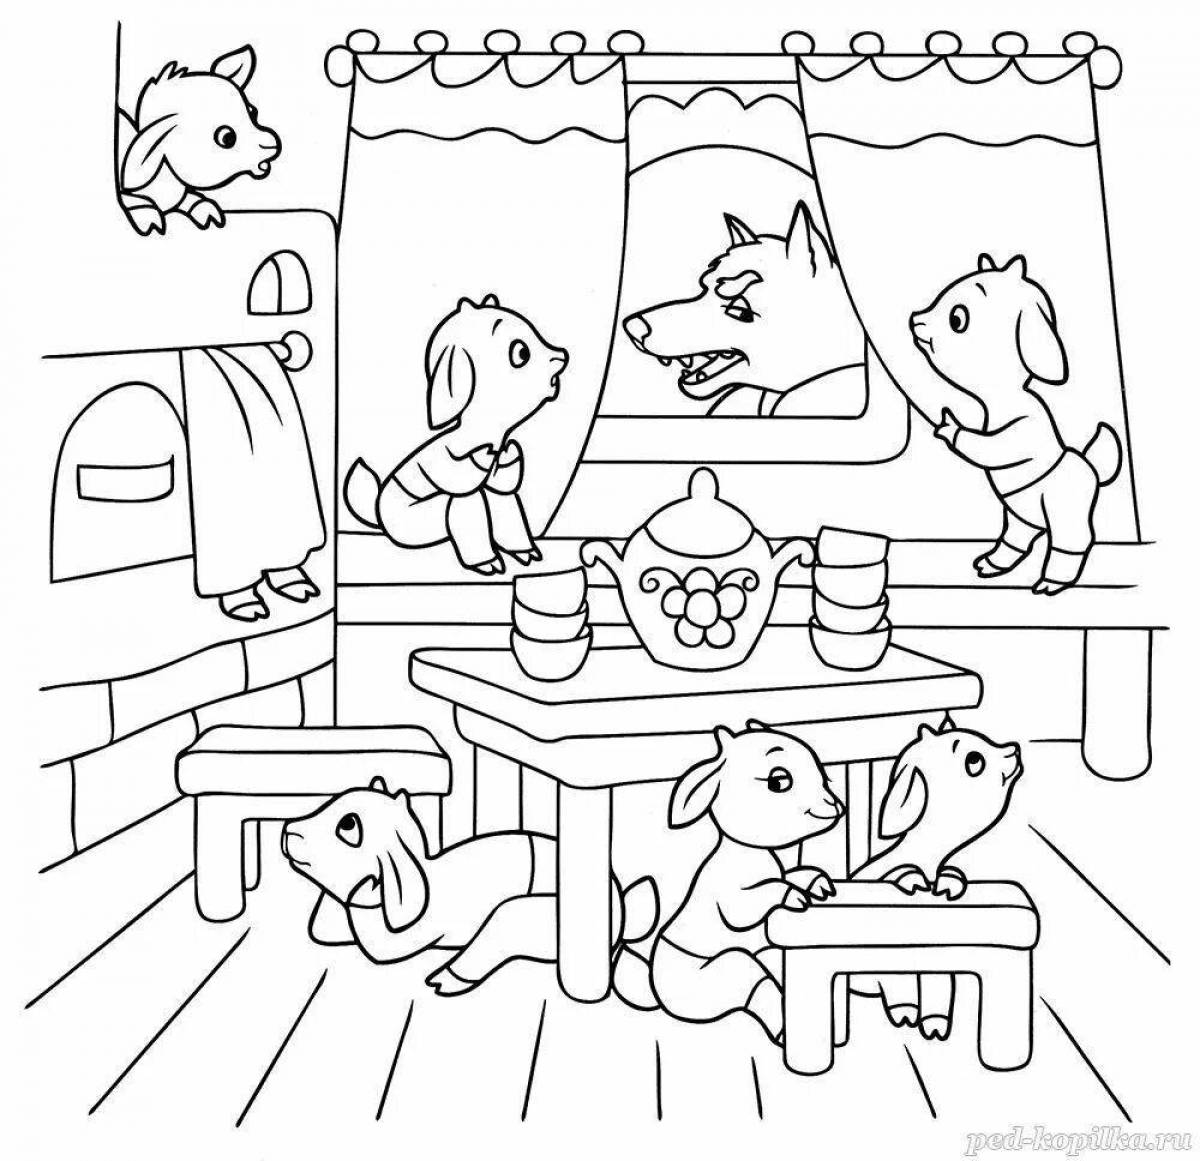 Coloring book for children 7